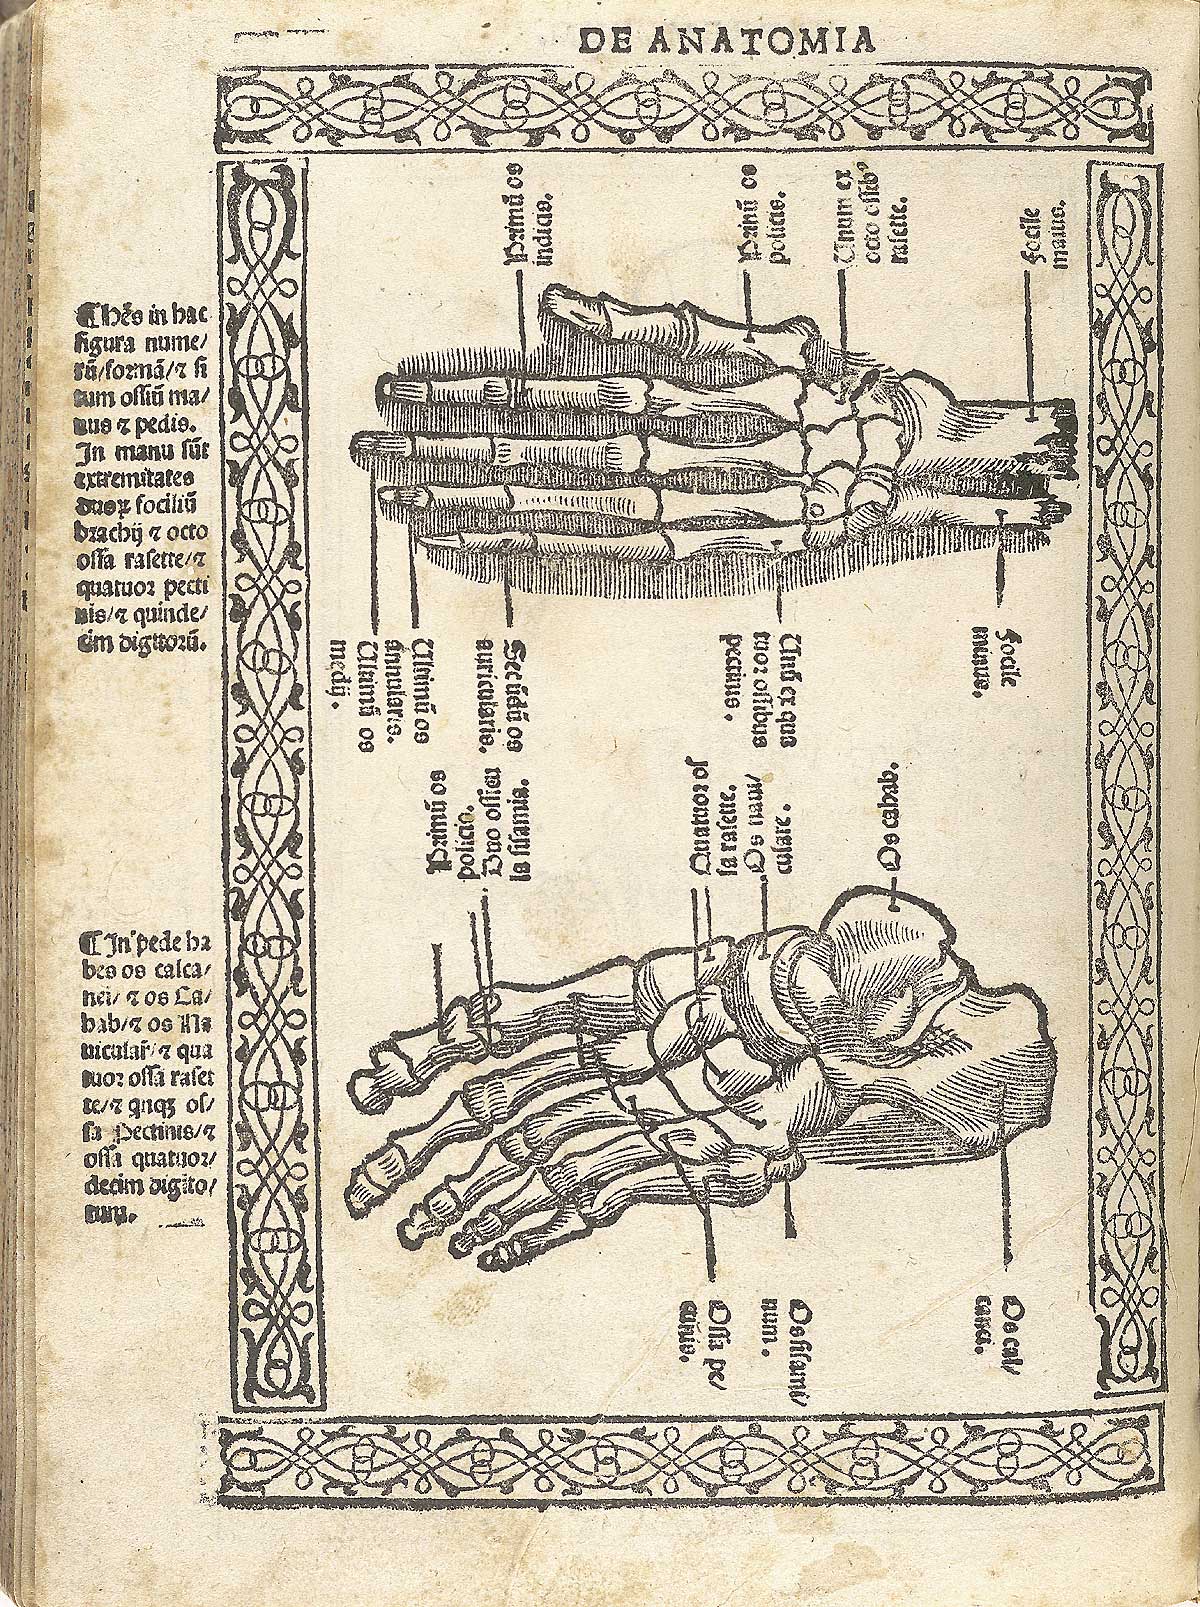 Woodcut of the bones of the hand and foot with Latin text labeling the bones individually; with a woodcut border and text in Latin on the left side of page, from Berengario da Carpi’s Isagogae breues, Bologna, 1523, NLM Call no. WZ 240 B488i 1523.